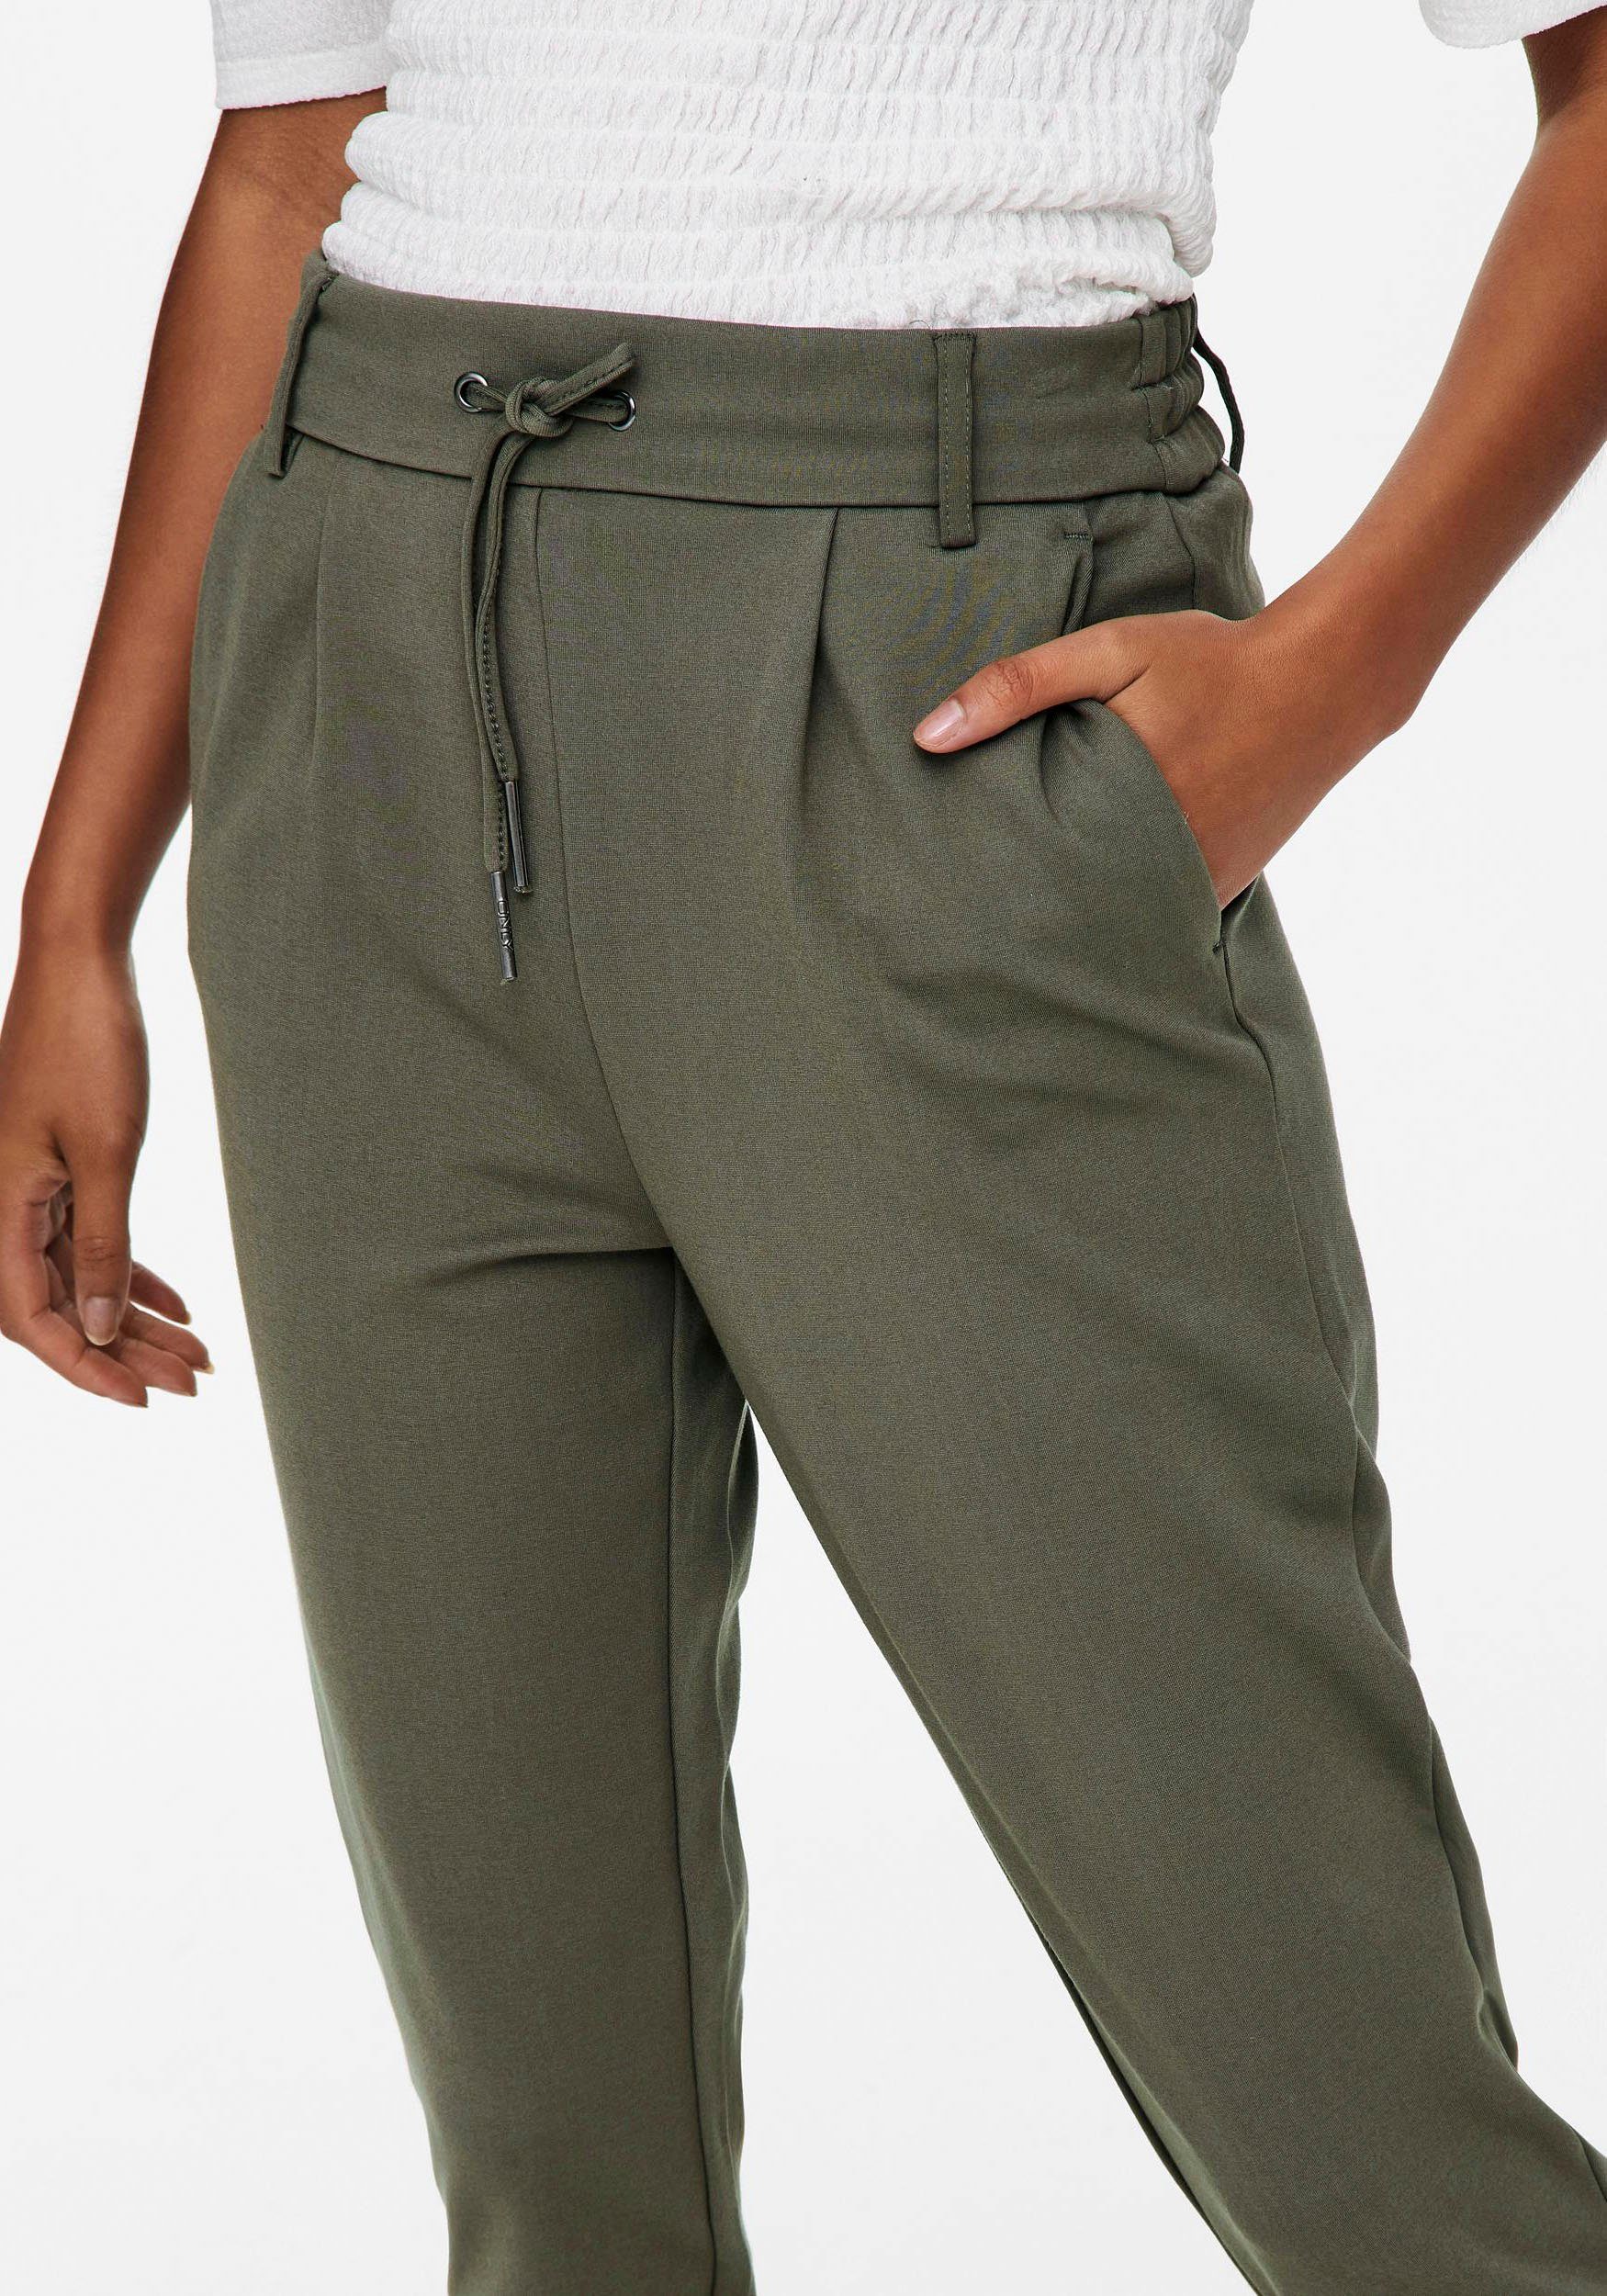 bungee Jogger ONLPOPTRASH Pants cord ONLY